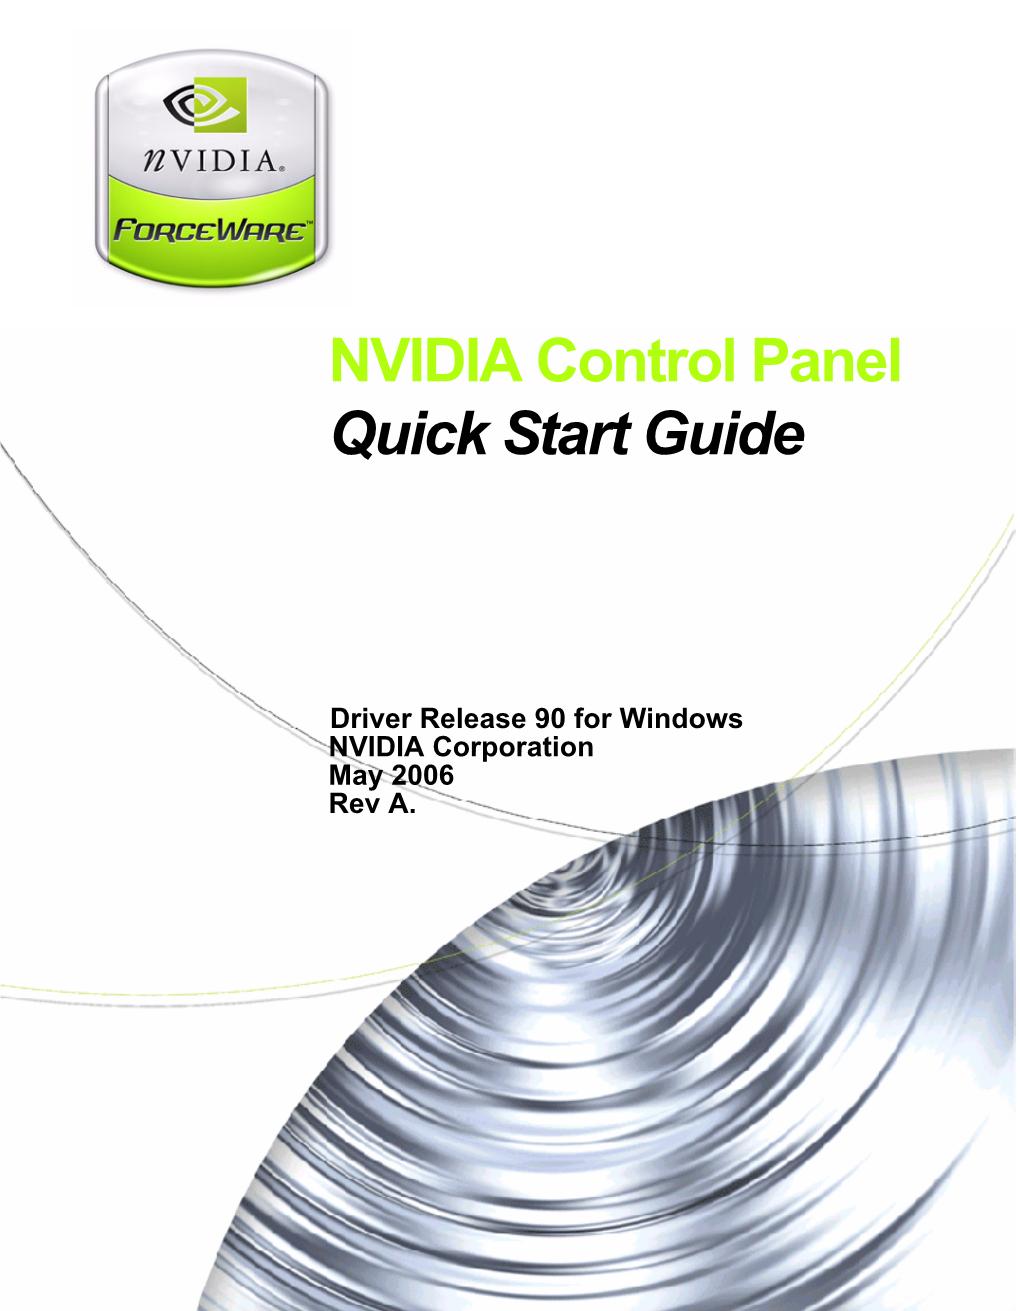 NVIDIA Control Panel Quick Start Guide